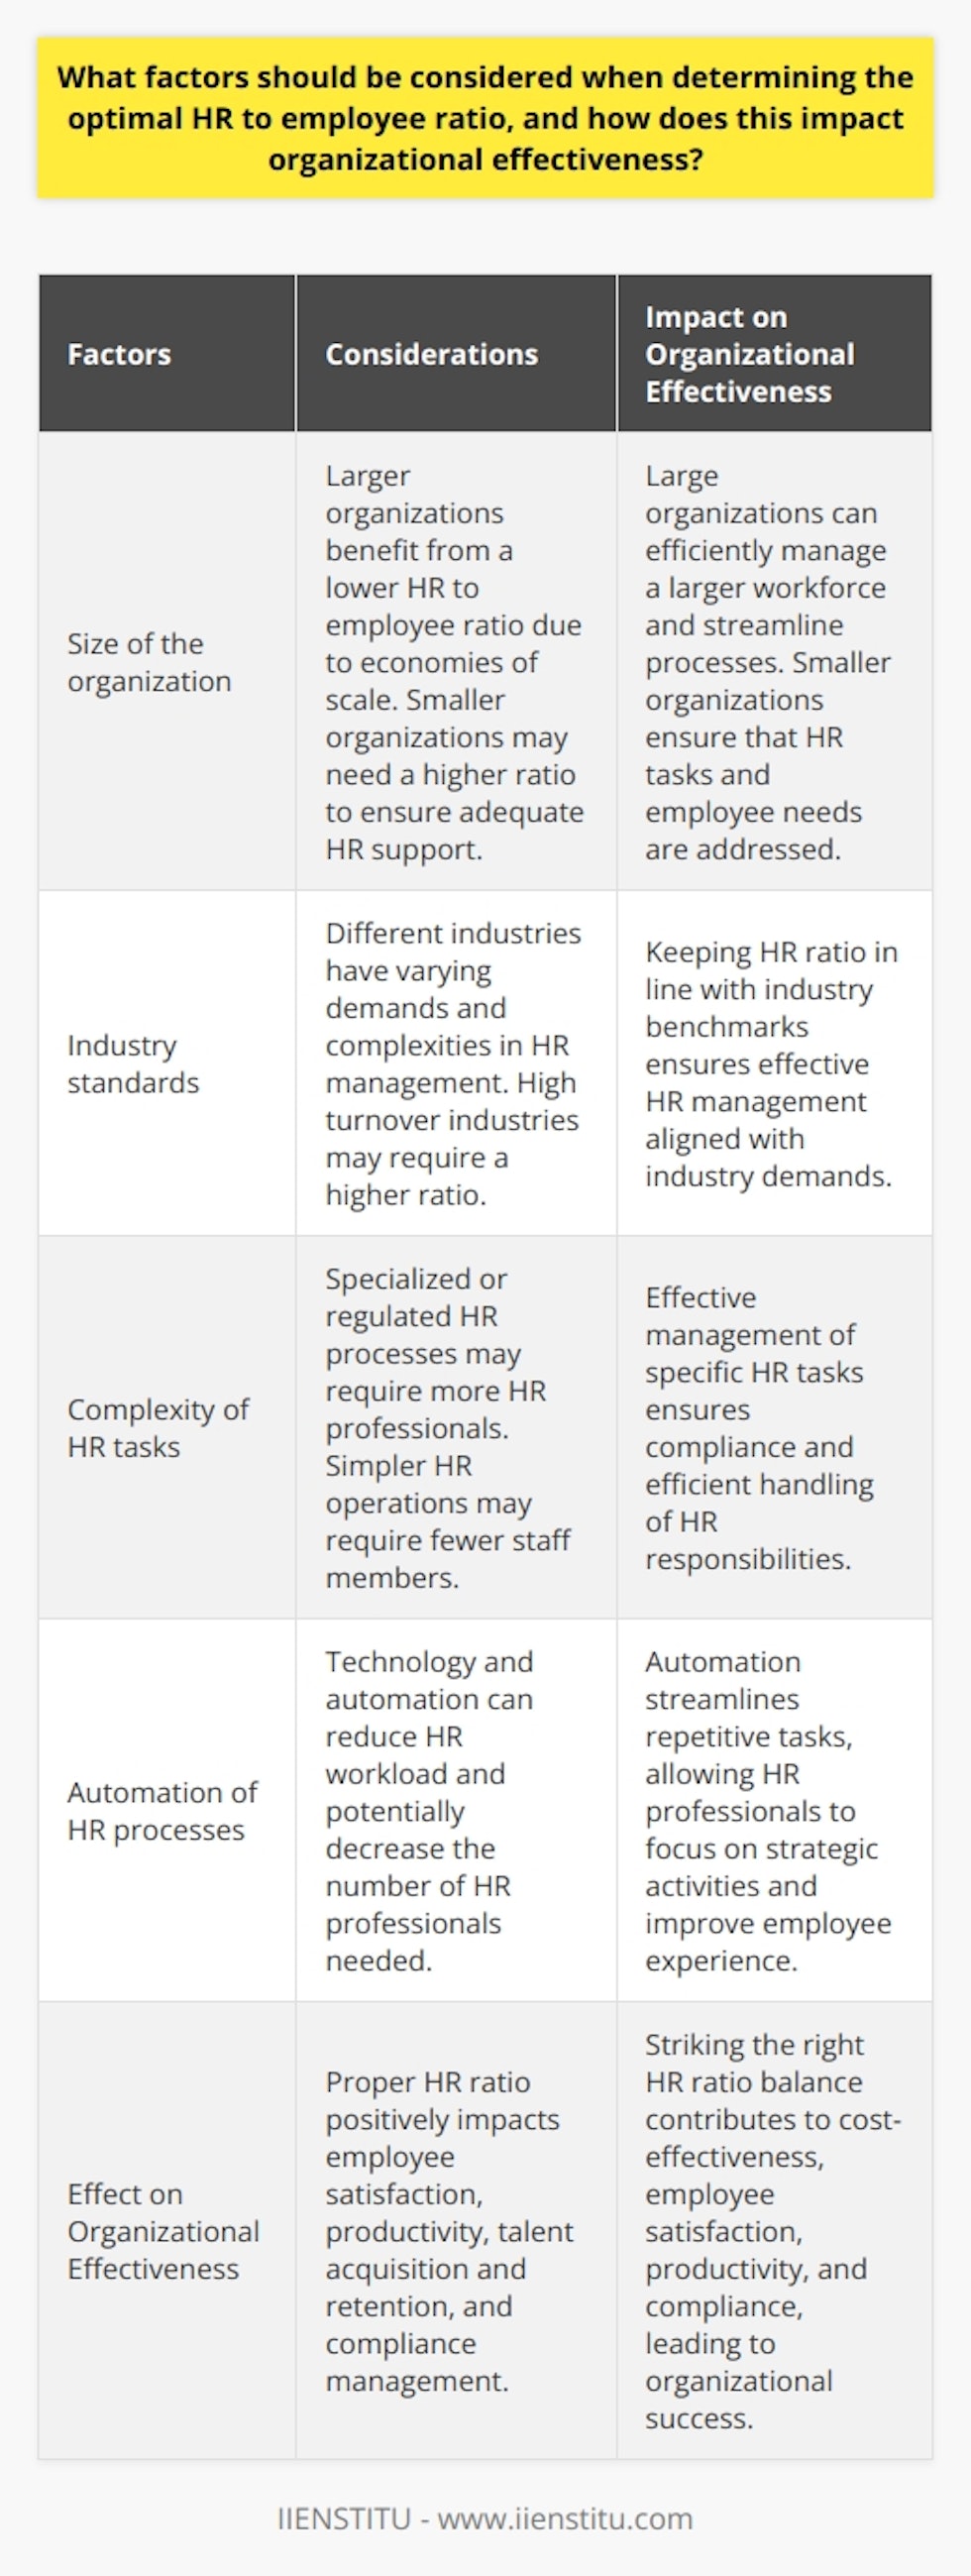 Determining the optimal HR to employee ratio is a critical decision that can significantly impact an organization's overall effectiveness. Several factors should be considered to make an informed decision.One important factor is the size of the organization. Larger organizations often benefit from a lower HR to employee ratio due to economies of scale. They have the resources to invest in advanced HR technologies and systems, allowing them to streamline processes and efficiently manage a larger workforce. On the other hand, smaller organizations may need a higher ratio to ensure that HR tasks and employee needs are adequately addressed.Industry standards also play a role in determining the appropriate HR to employee ratio. Different industries have varying demands and complexities when it comes to HR management. For instance, industries with high turnover rates, such as retail or hospitality, may require a higher HR to employee ratio to handle the constant influx of new hires and turnover processes. Comparing a company's ratio to industry benchmarks and competitors can provide insights into what is considered effective in the specific industry.The complexity of HR tasks within an organization is another important consideration. Companies with highly specialized or regulated HR processes, such as talent acquisition or compliance, may require more HR professionals to effectively manage these tasks. Conversely, organizations with simpler and more straightforward HR operations may require fewer staff members.The automation of HR processes is also a significant factor to consider. Incorporating technology and automation into HR tasks can help reduce the HR workload and potentially decrease the number of HR professionals needed. Automation can streamline repetitive tasks such as data entry, benefits administration, or payroll processing, allowing HR professionals to focus on more strategic and value-added activities. However, organizations should balance the benefits of automation with the potential loss of personal touch and employee engagement in HR processes.Determining the optimal HR to employee ratio is crucial for organizational effectiveness. When the ratio is appropriate, it positively impacts various aspects of the organization. Employee satisfaction is enhanced as HR professionals have the capacity to address their needs effectively. Productivity can also increase as HR teams have the bandwidth to focus on talent development and management. Effective HR management also contributes to talent acquisition and retention by creating a positive employee experience. Furthermore, maintaining compliance with regulations becomes more manageable, reducing the risk of legal issues and penalties.In conclusion, the optimal HR to employee ratio is influenced by several factors, including organizational size, industry standards, the complexity of HR tasks, and the automation of HR processes. By carefully considering these factors, organizations can ensure an effective HR presence, which directly impacts their overall success. It is crucial to strike a balance between cost-effectiveness, employee satisfaction, productivity, and compliance to achieve organizational objectives.